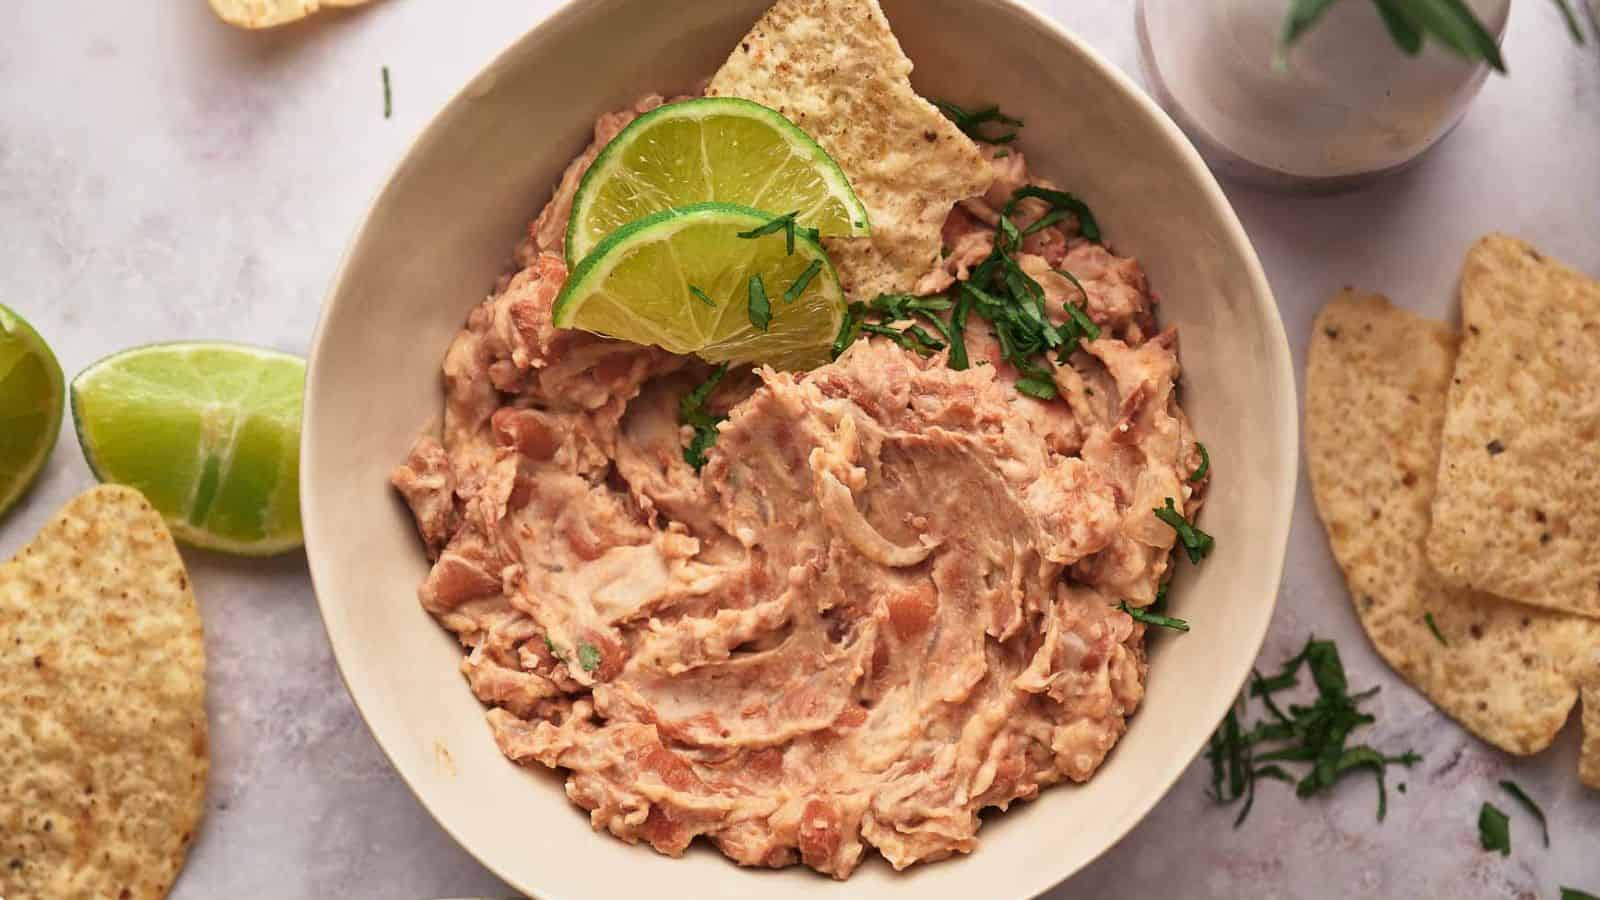 <p>Indulge in the heartiness of refried beans – a budget-friendly dish that boasts rich, savory flavors. With every bite, you’ll savor the satisfaction of a side that doesn’t break the bank. This recipe proves that you can enjoy a delicious addition to your meal without spending too much money. Simple, tasty, and easy on your wallet – refried beans redefine affordable indulgence.<br><strong>Get the Recipe: </strong><a href="https://www.splashoftaste.com/homemade-refried-beans-recipe/?utm_source=msn&utm_medium=page&utm_campaign=msn">Refried Beans</a></p>